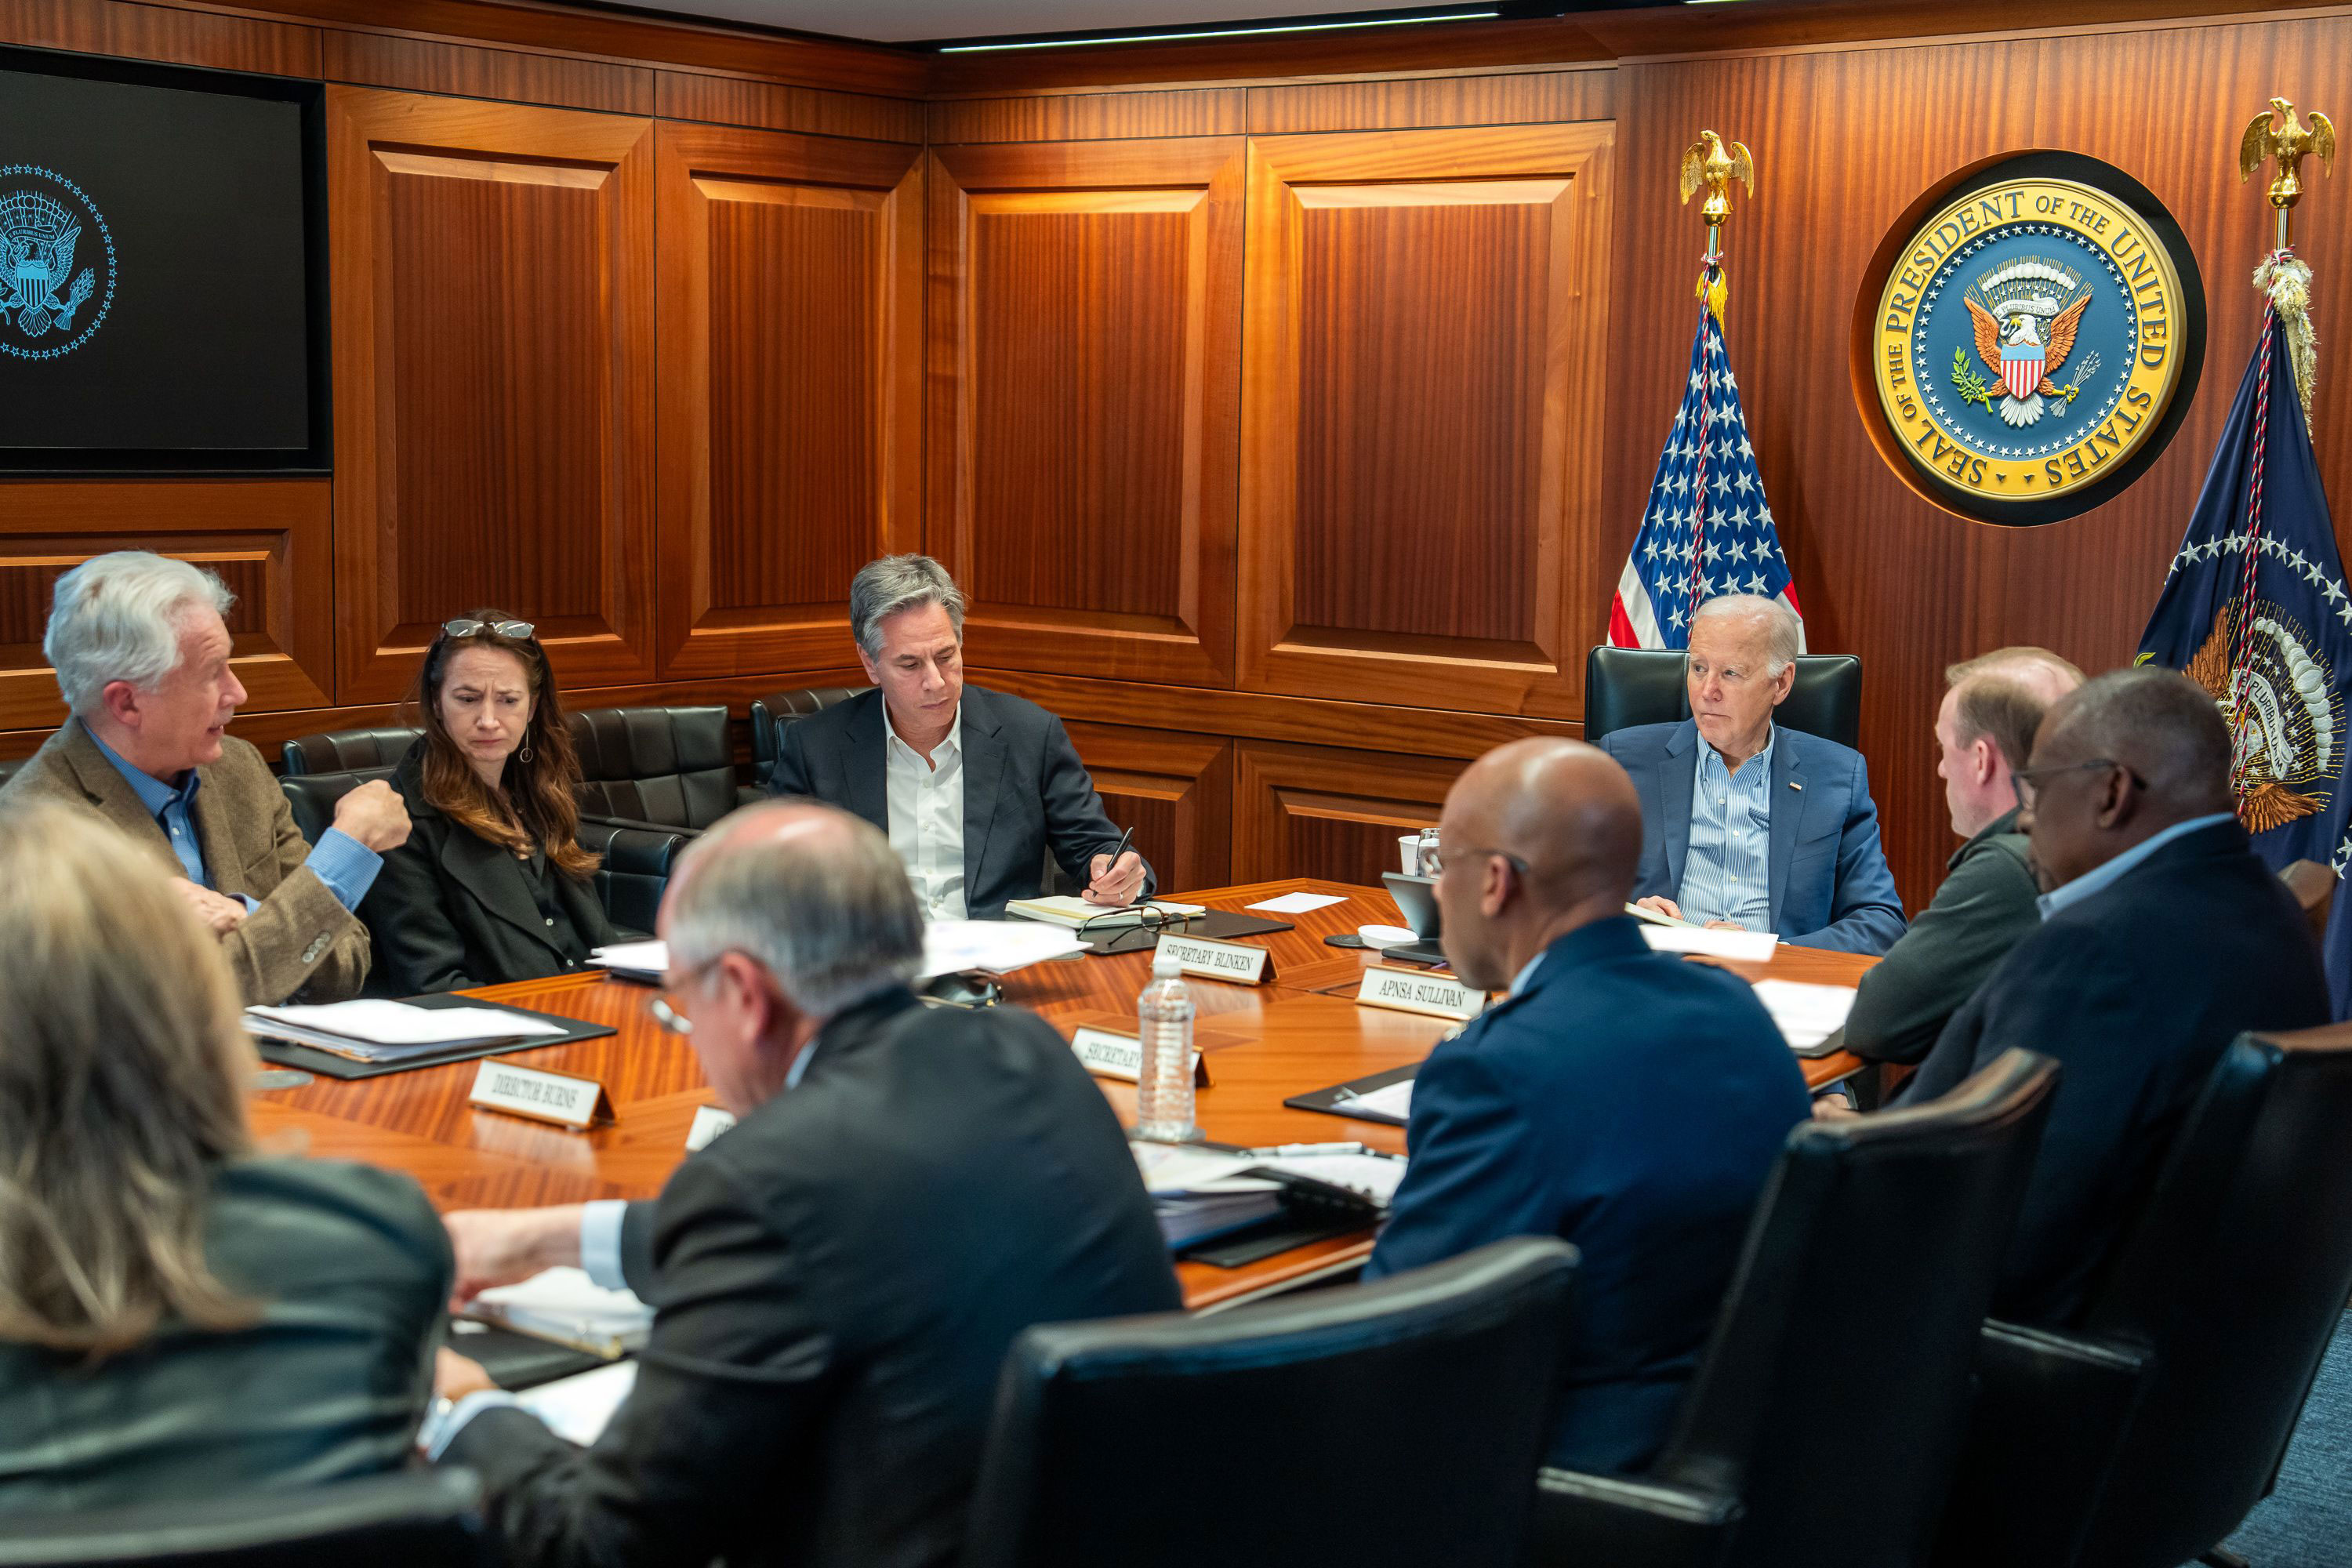 President Joe Biden meets with members of the National Security team regarding the unfolding missile attacks on Israel from Iran on Saturday evening in the White House Situation Room. Some portions of this handout photo have been blurred by the source. 